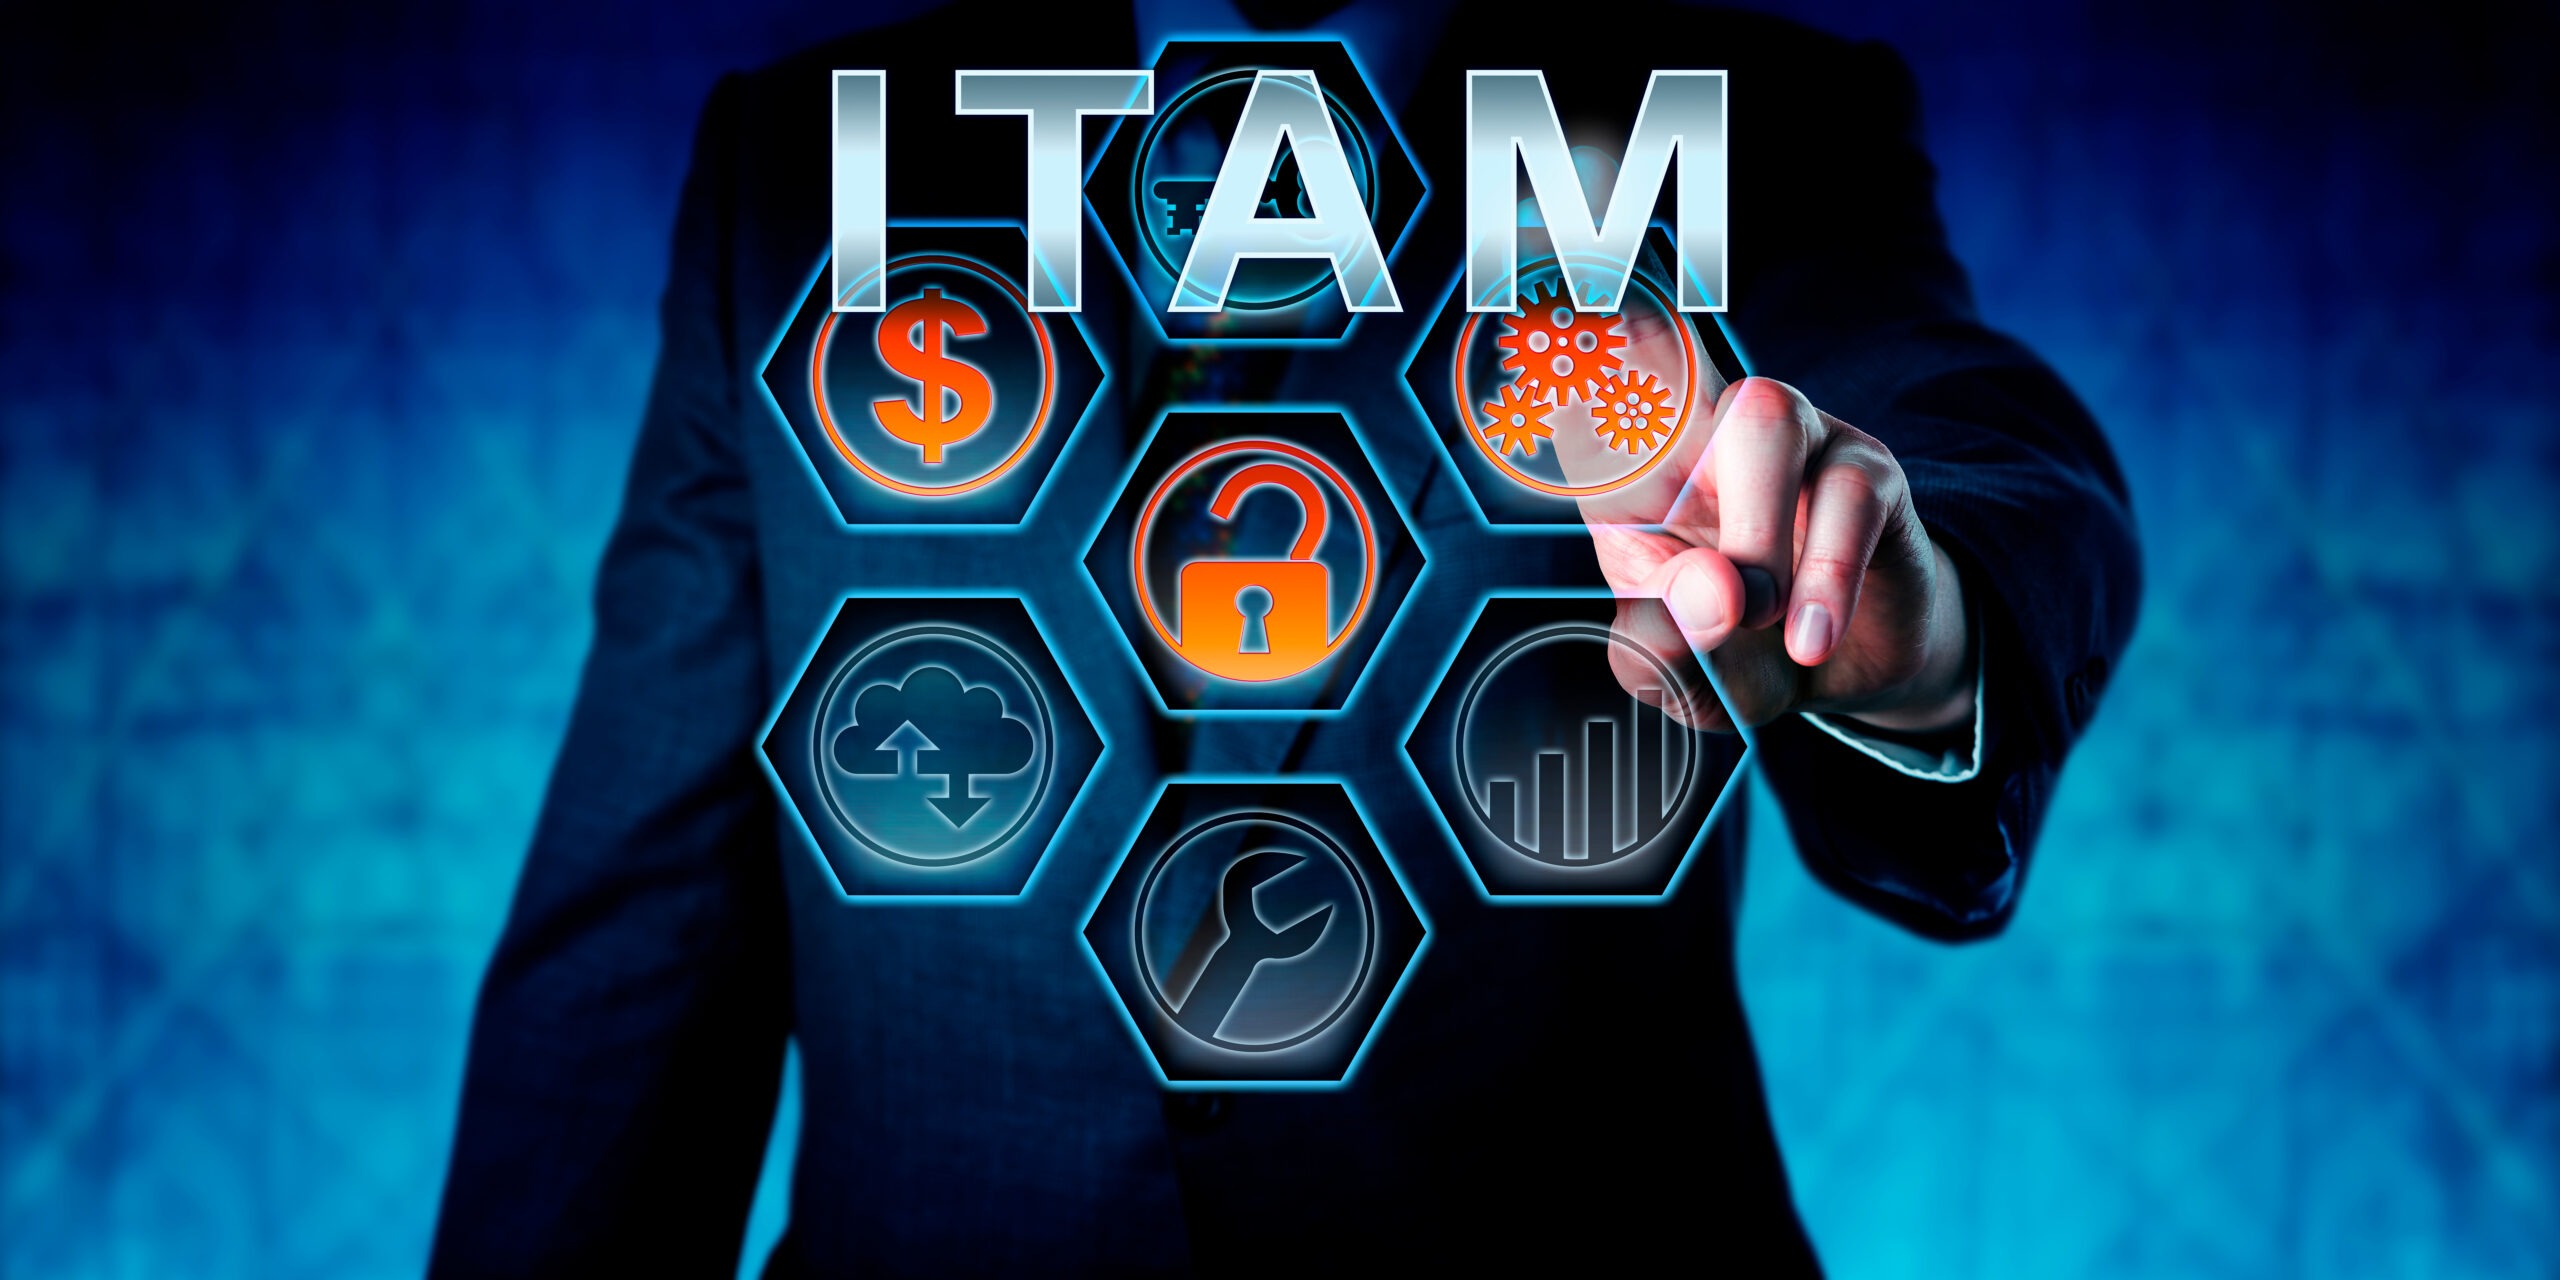 Business person is touching ITAM on an interactive virtual control monitor. Business strategic metaphor, information technology concept, corporate terminology and acronym for IT Asset Management.